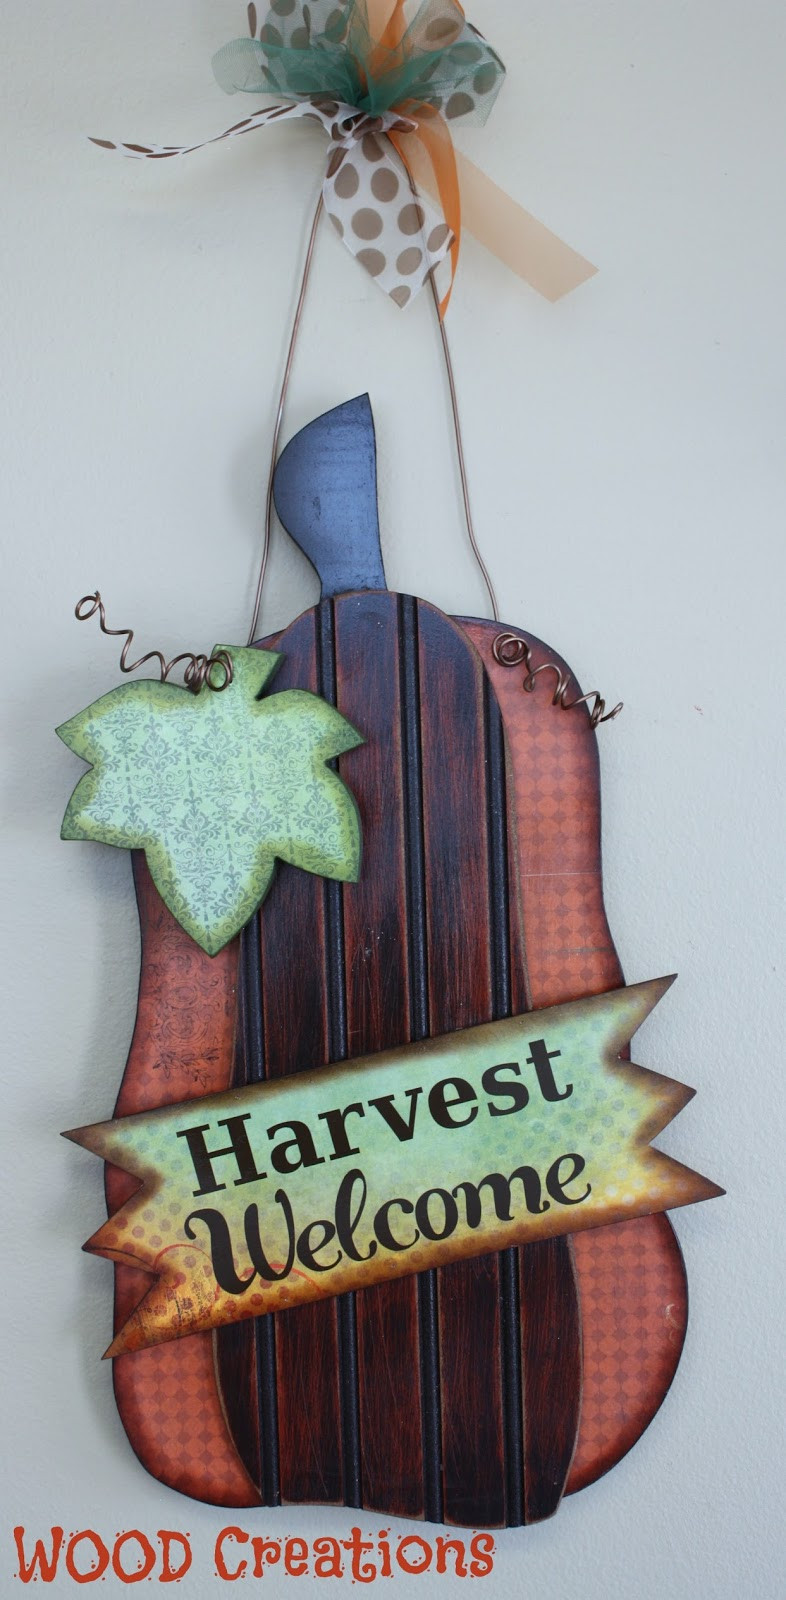 Fall Wooden Craft Ideas
 WOOD Creations Fall Crafts Are Here